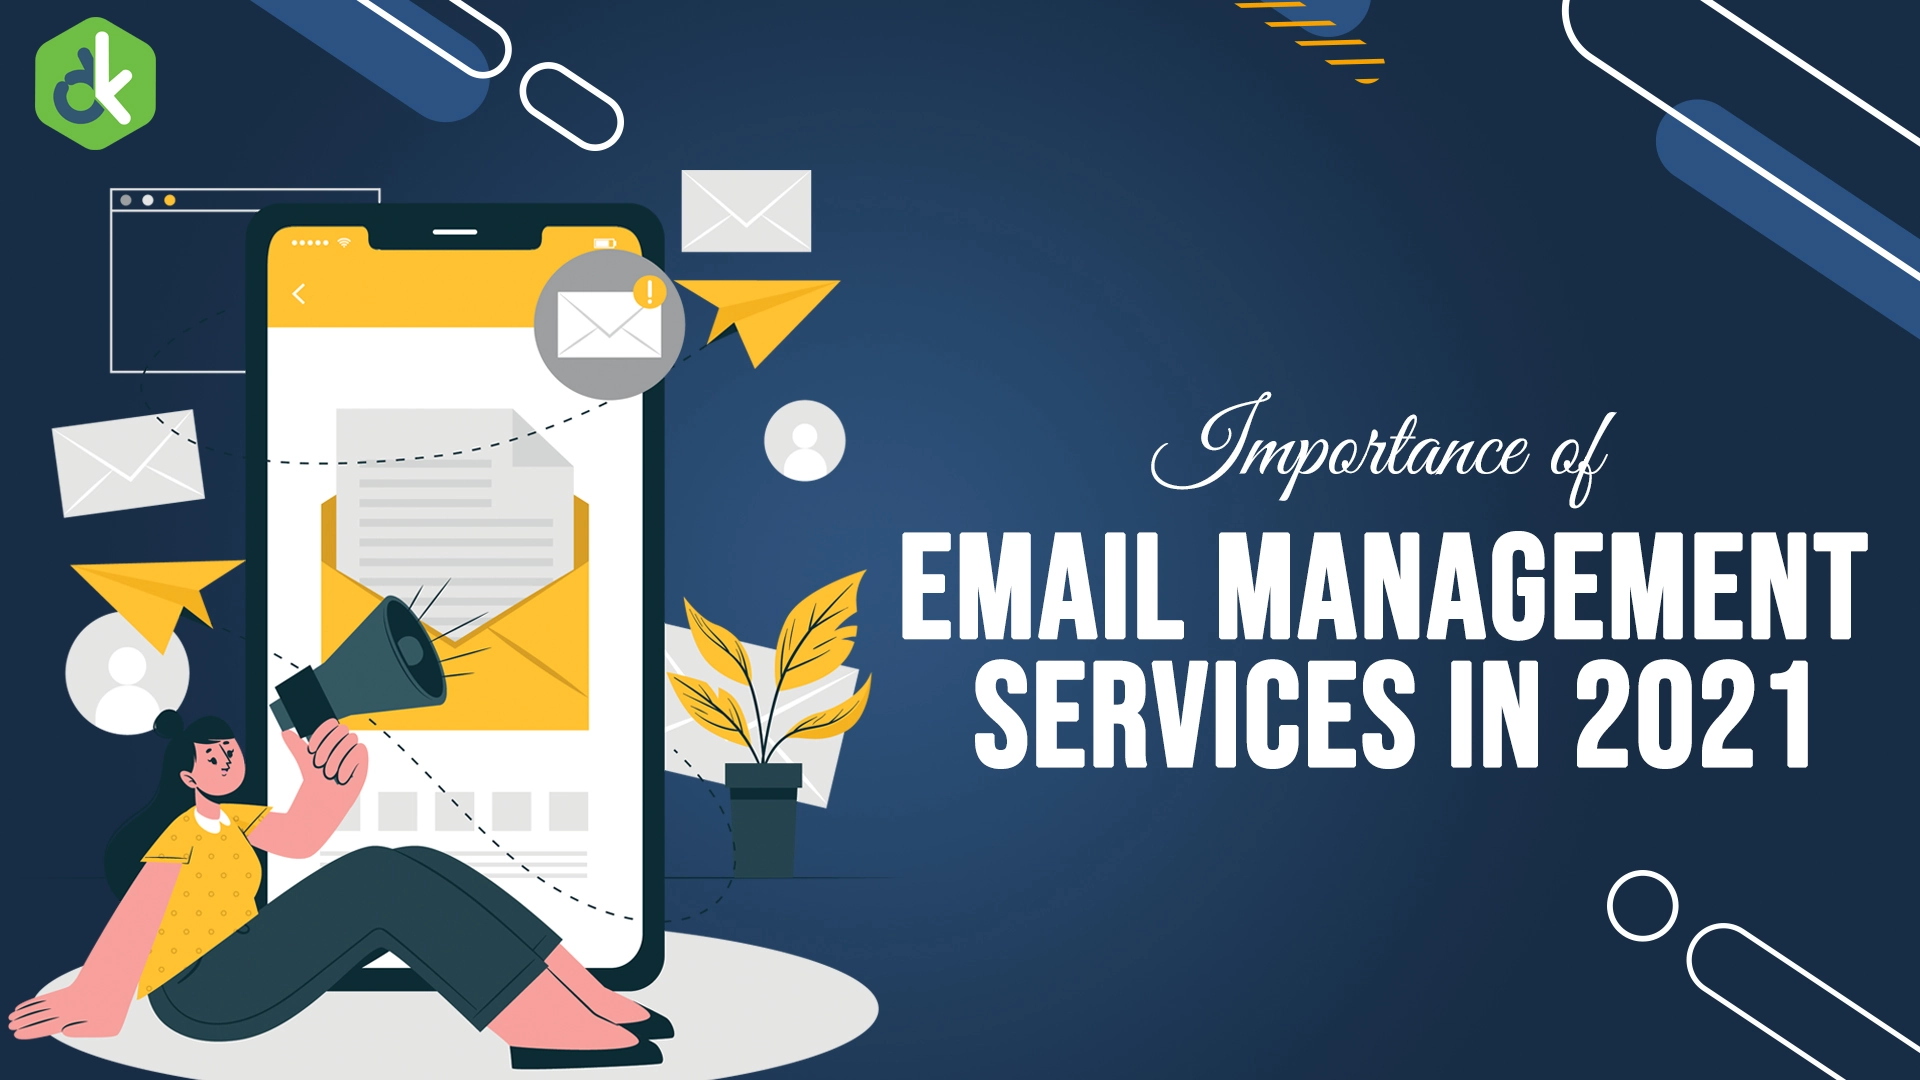 Importance of email management services in 2021